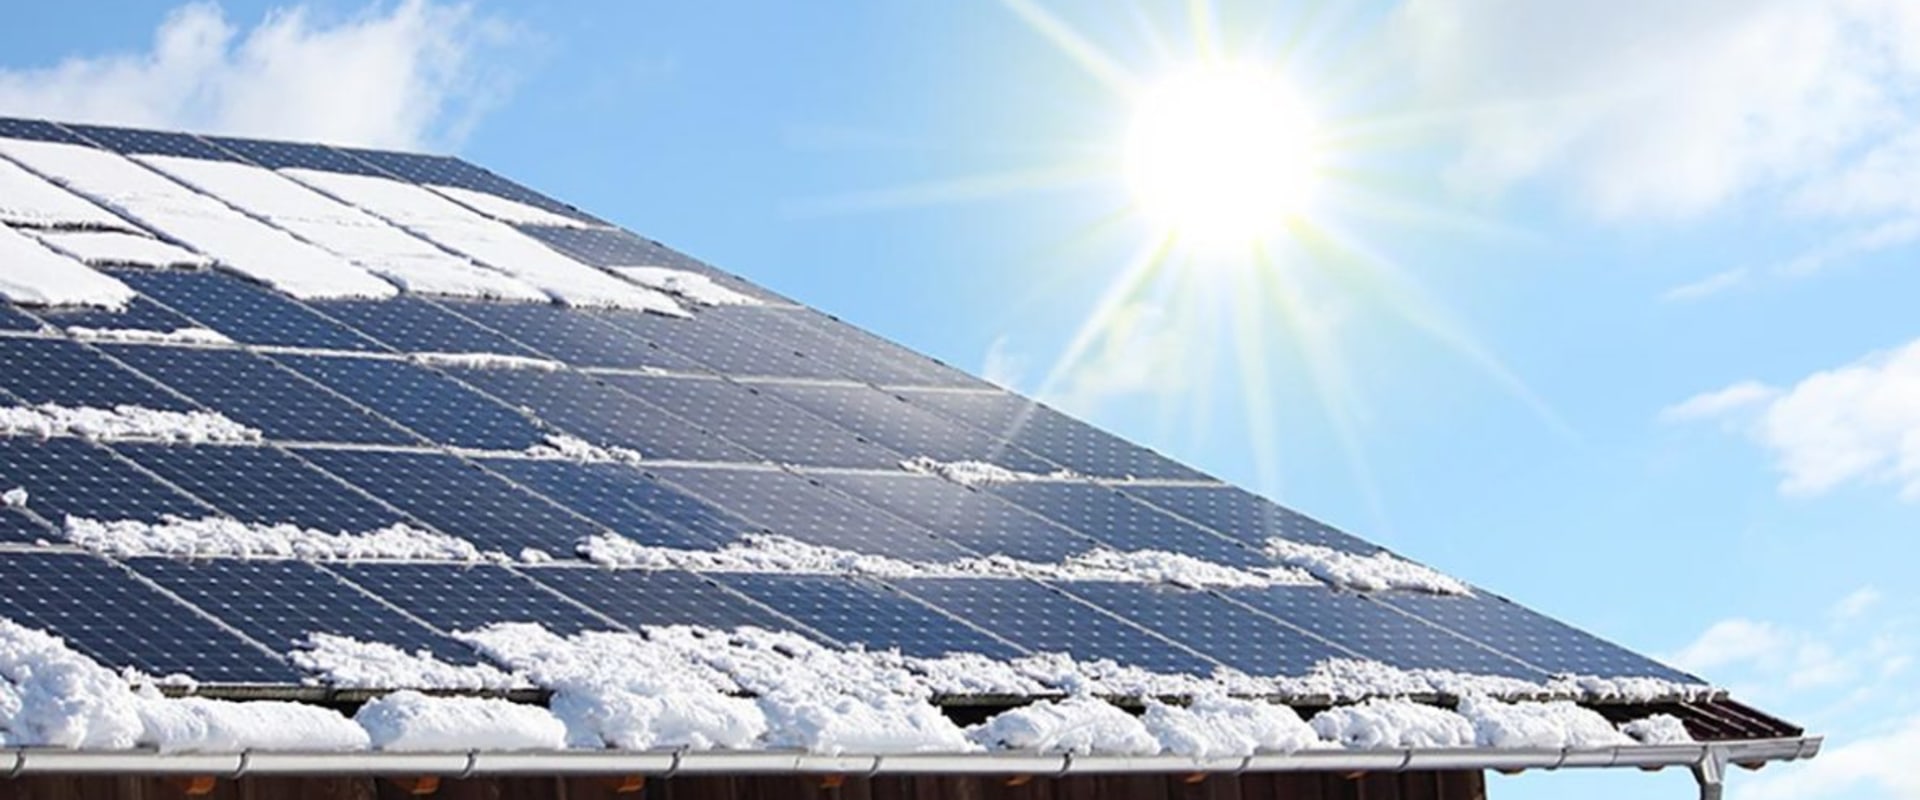 When Does Solar Power Shine?